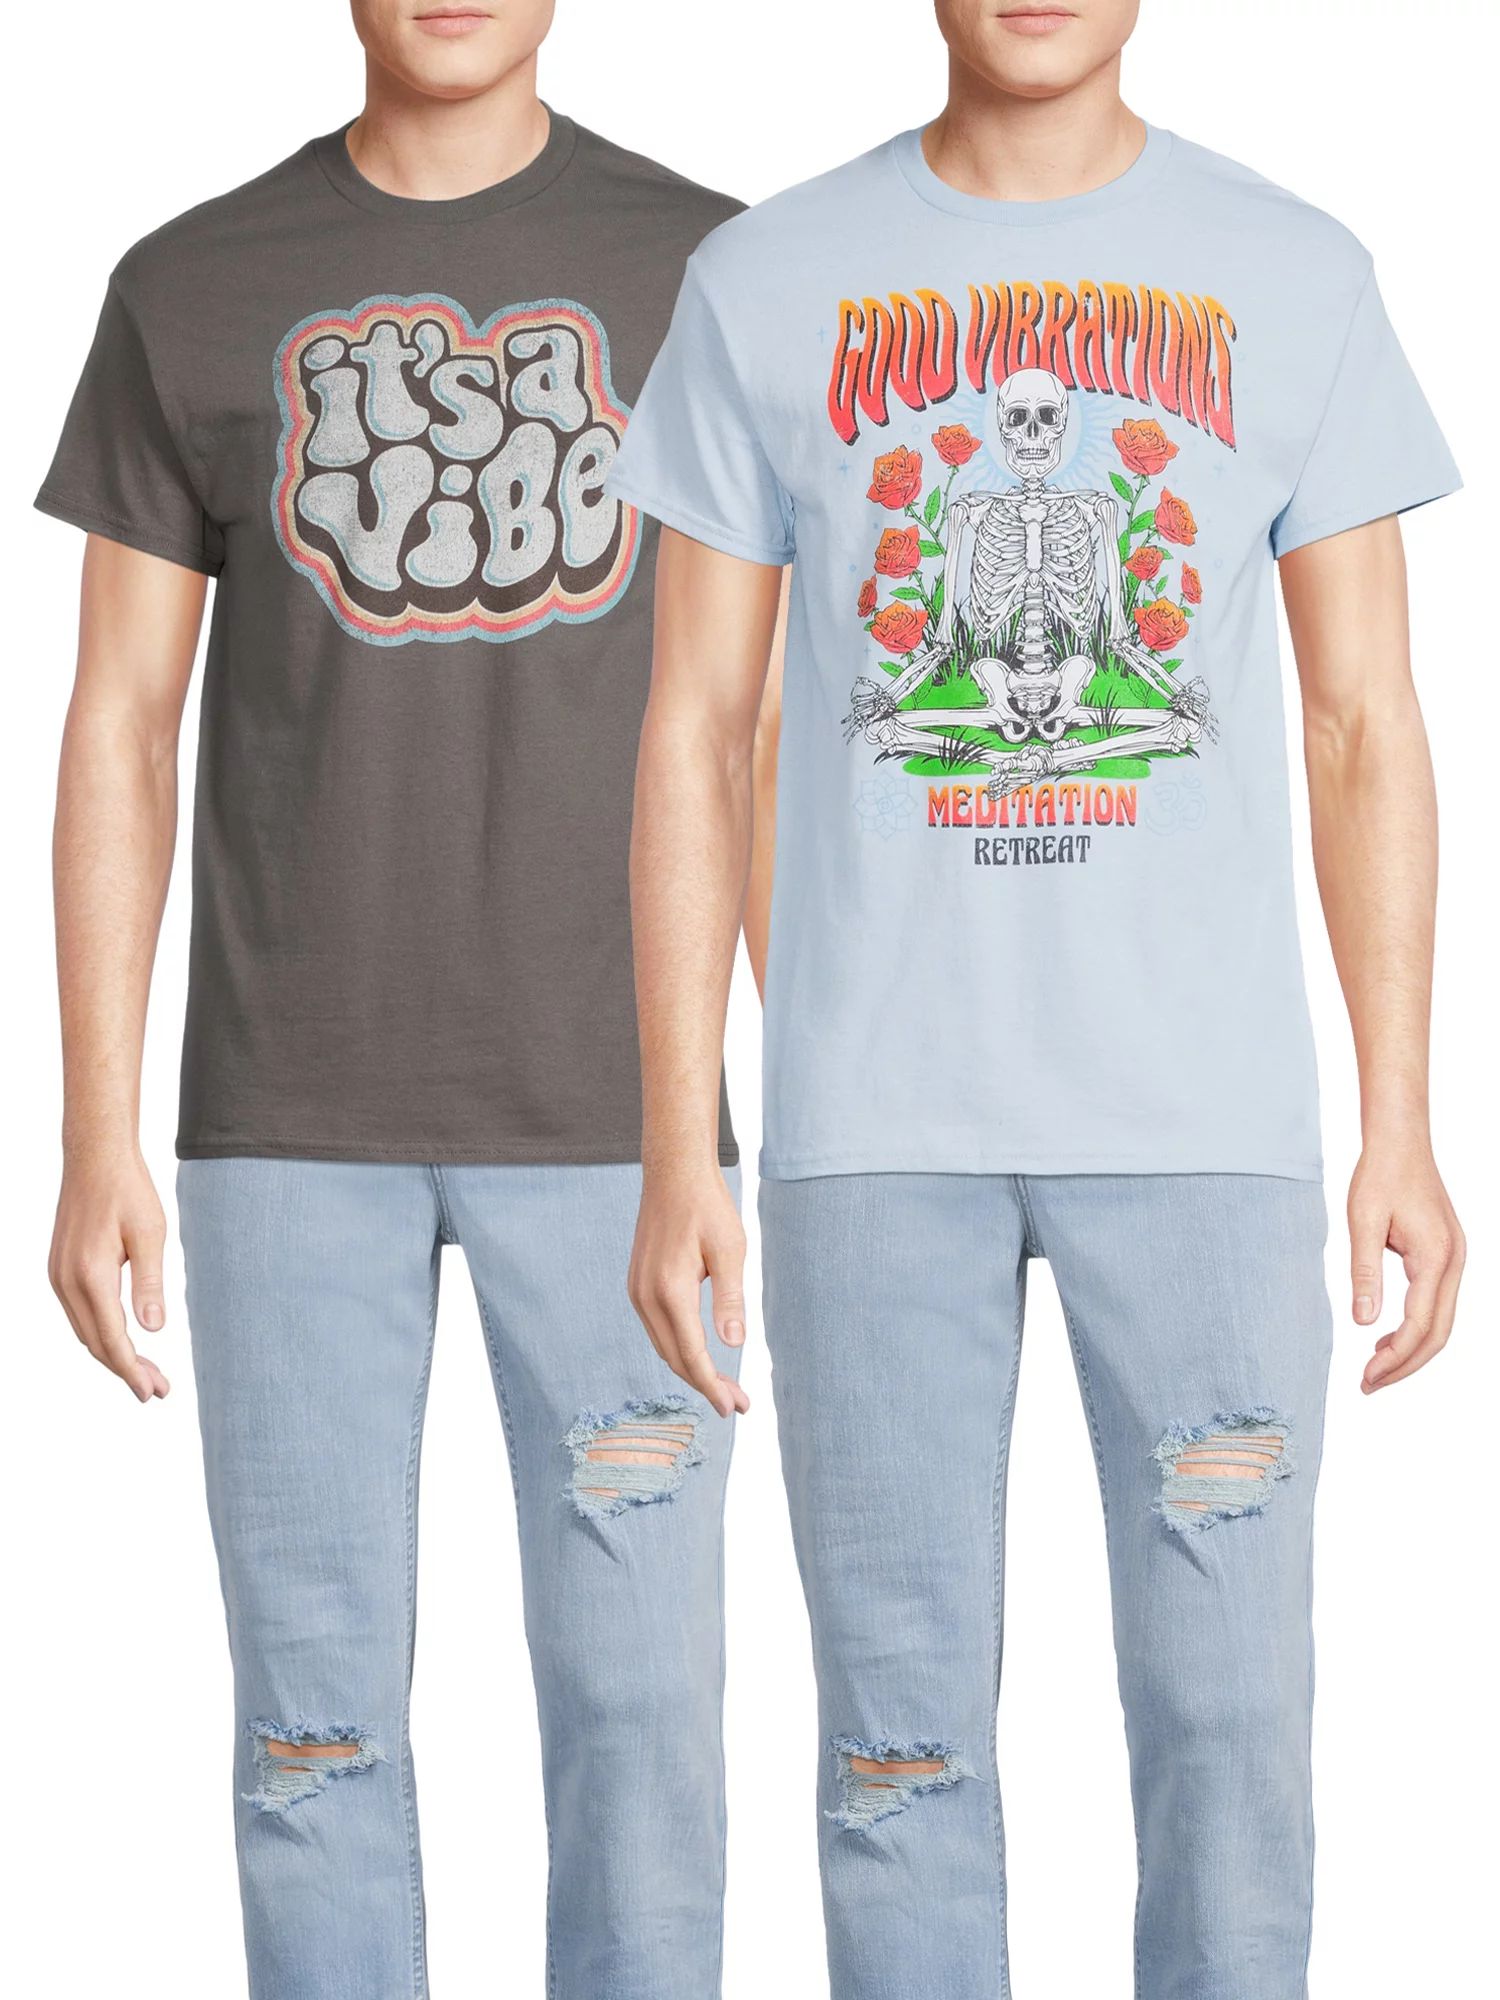 Humor Men's & Big Men's It's a Vibe and Good Vibrations Skeleton Graphic T-Shirts, 2-Pack | Walmart (US)